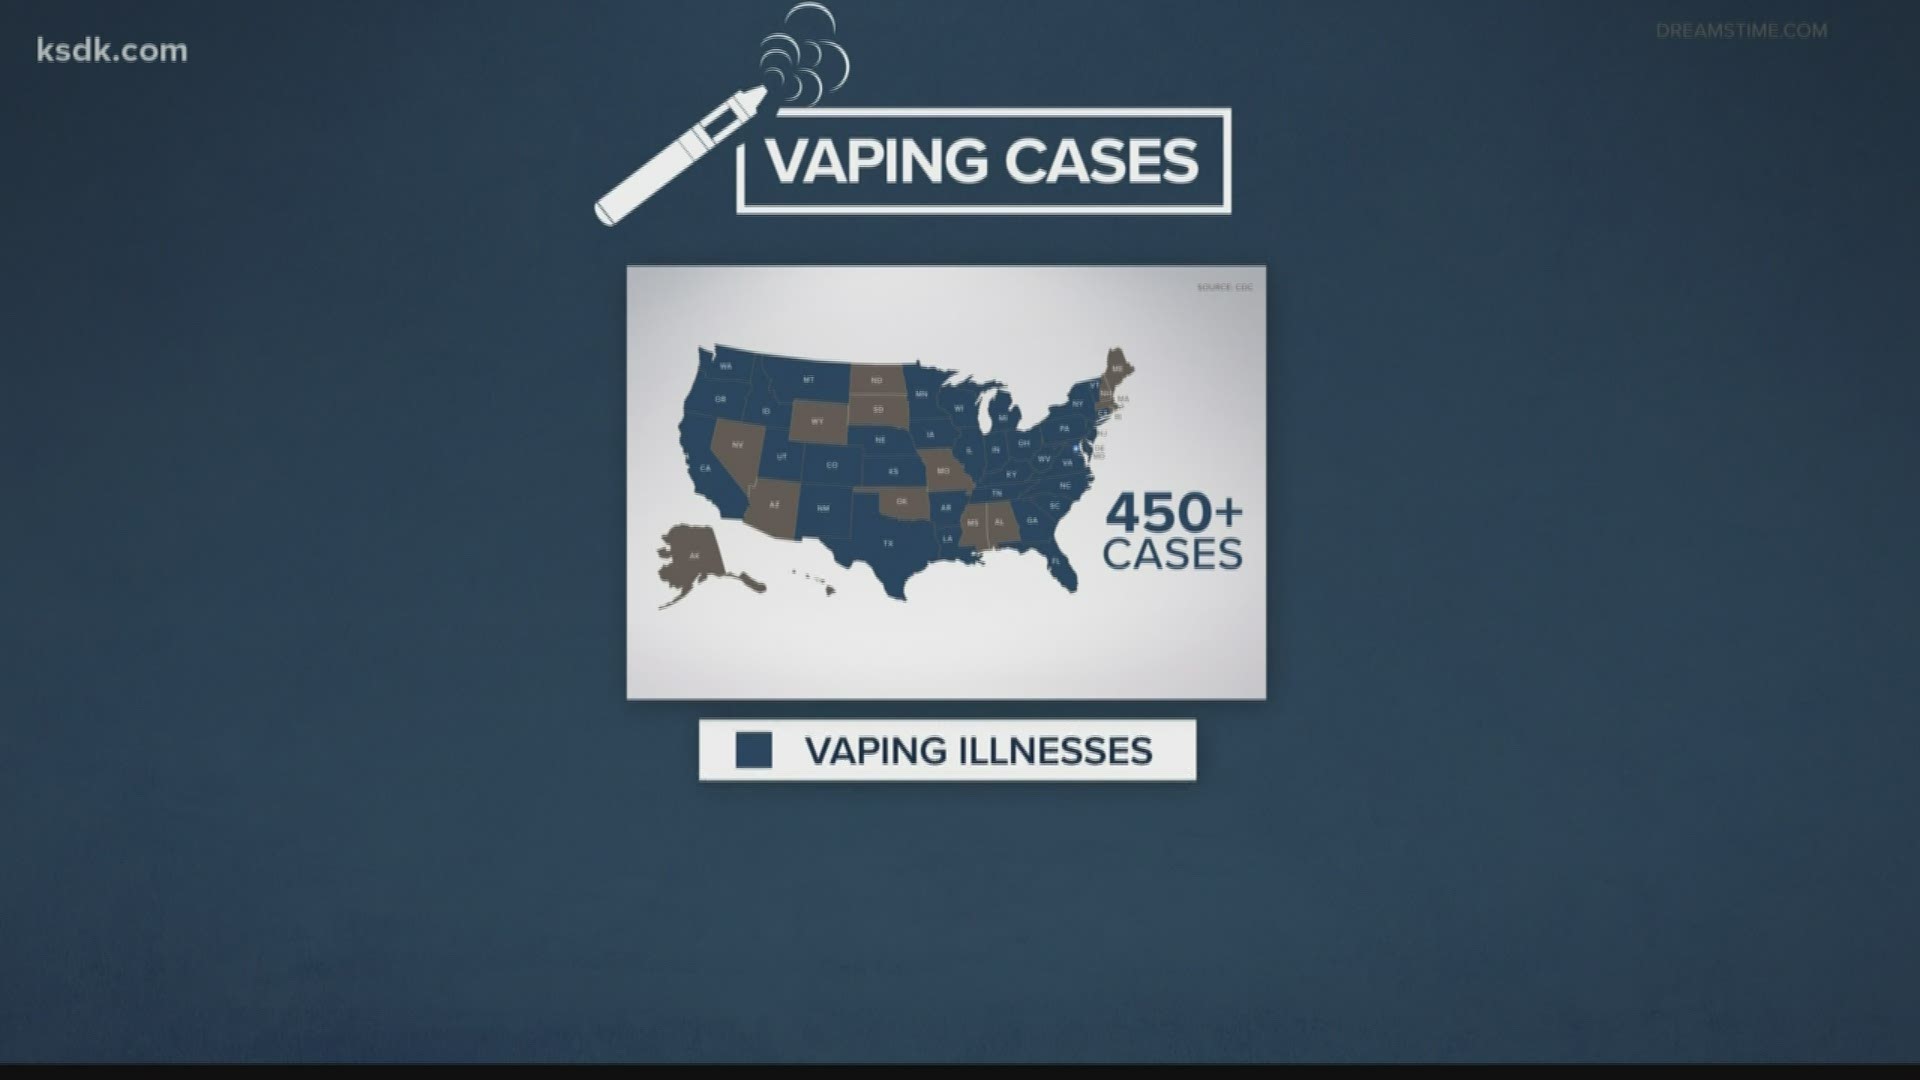 Late today, Missouri health officials confirmed two cases of lung illness associated with the use of e-cigarettes.